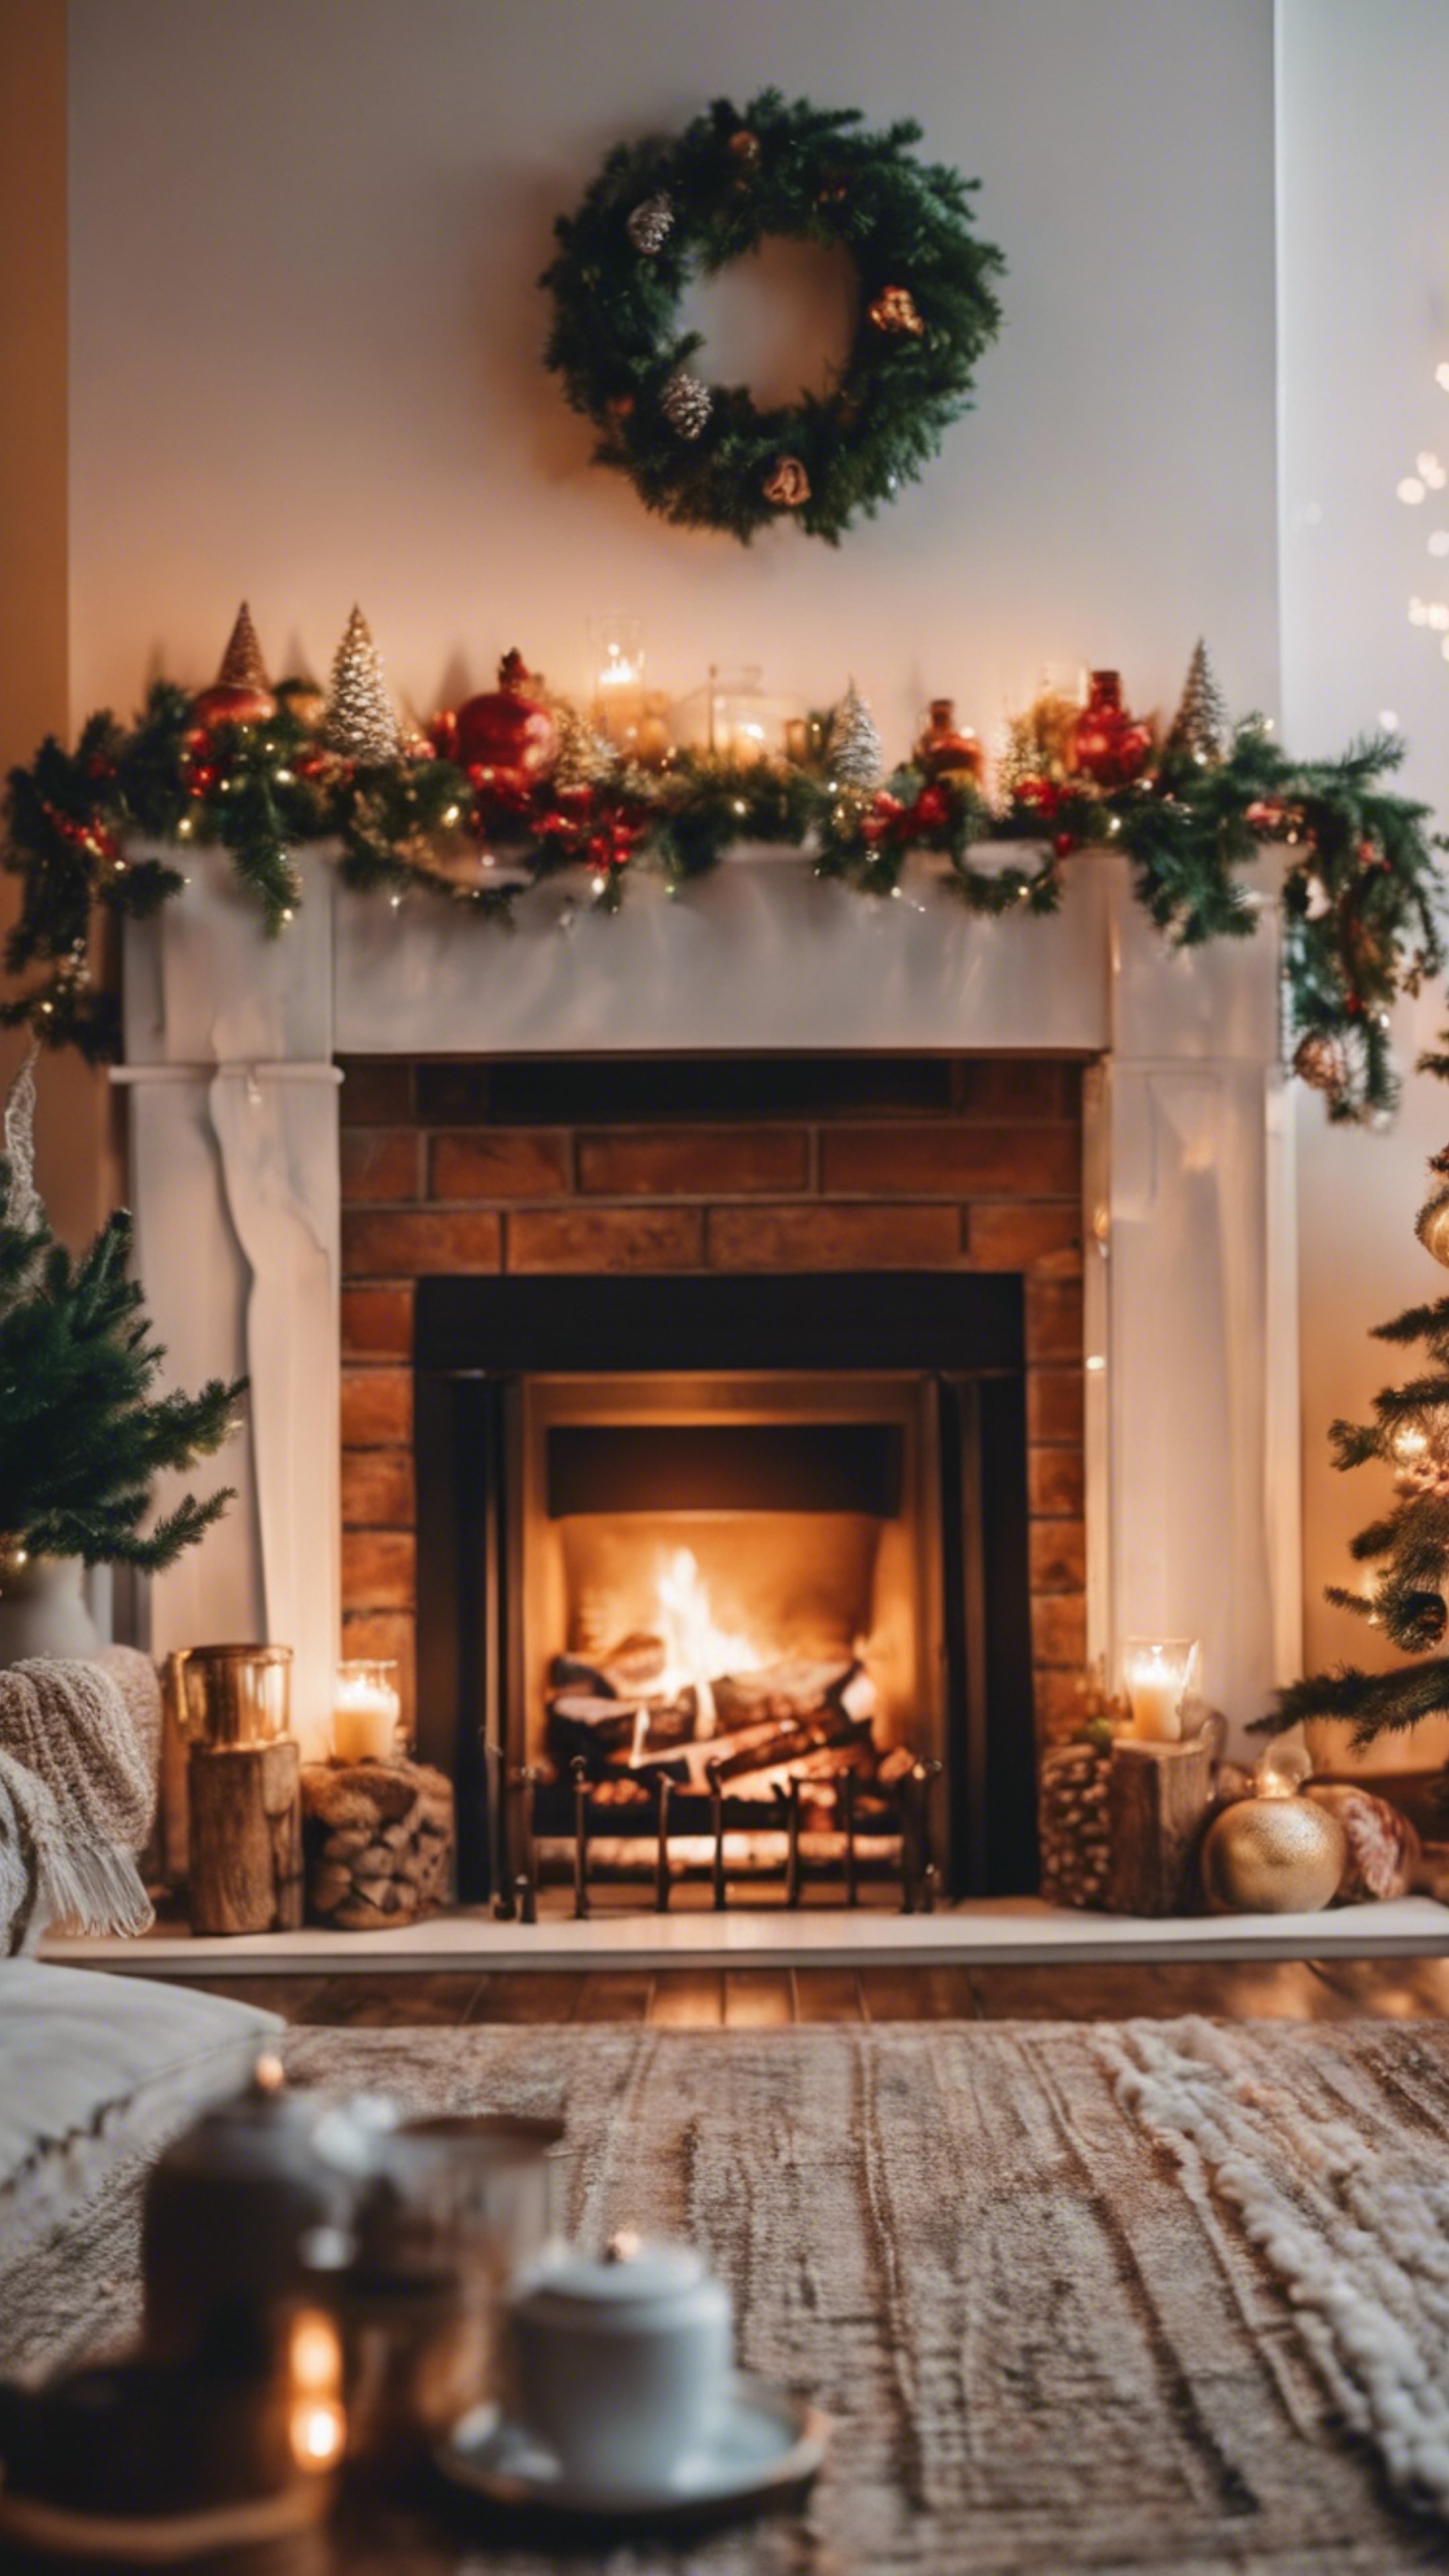 A cozy living room decorated for Christmas in boho style with a fireplace. Tapeta[2870ecc061ac4c6491a9]